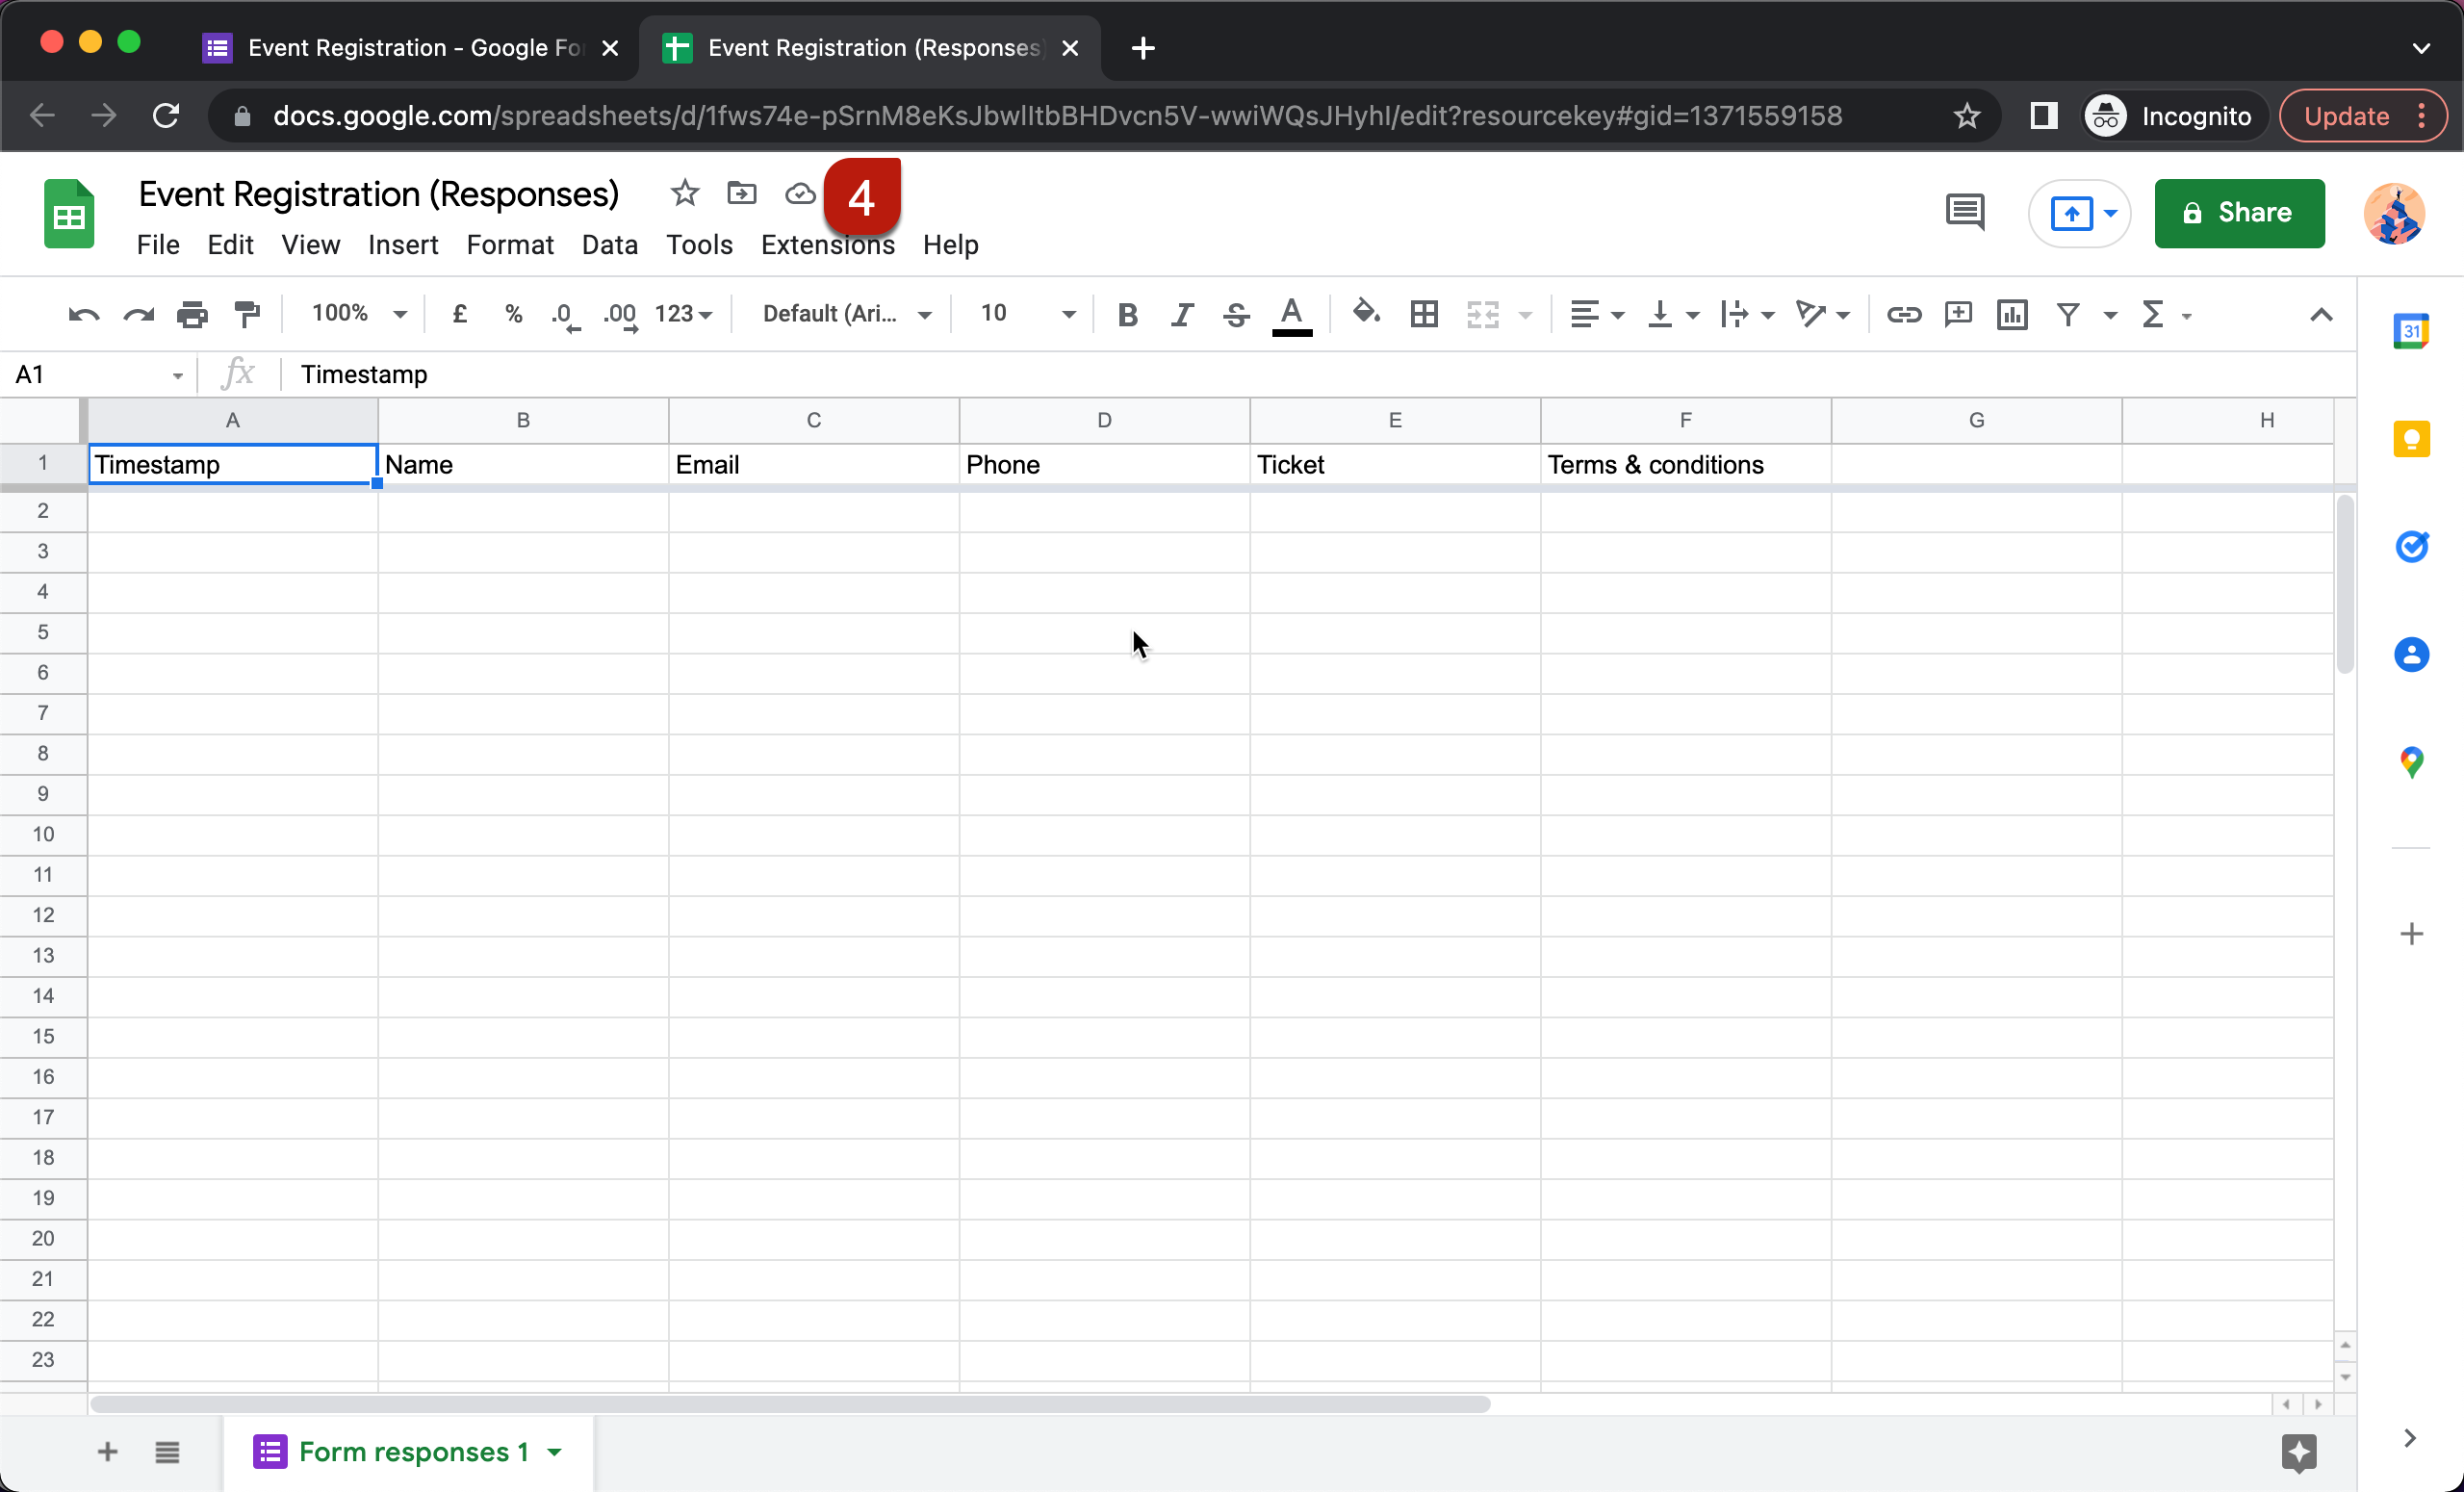 Step 4: A new spreadsheet linked with this form will open in a new tab. When a user fills the form and submits it, the responses will be automatically synced to this sheet.